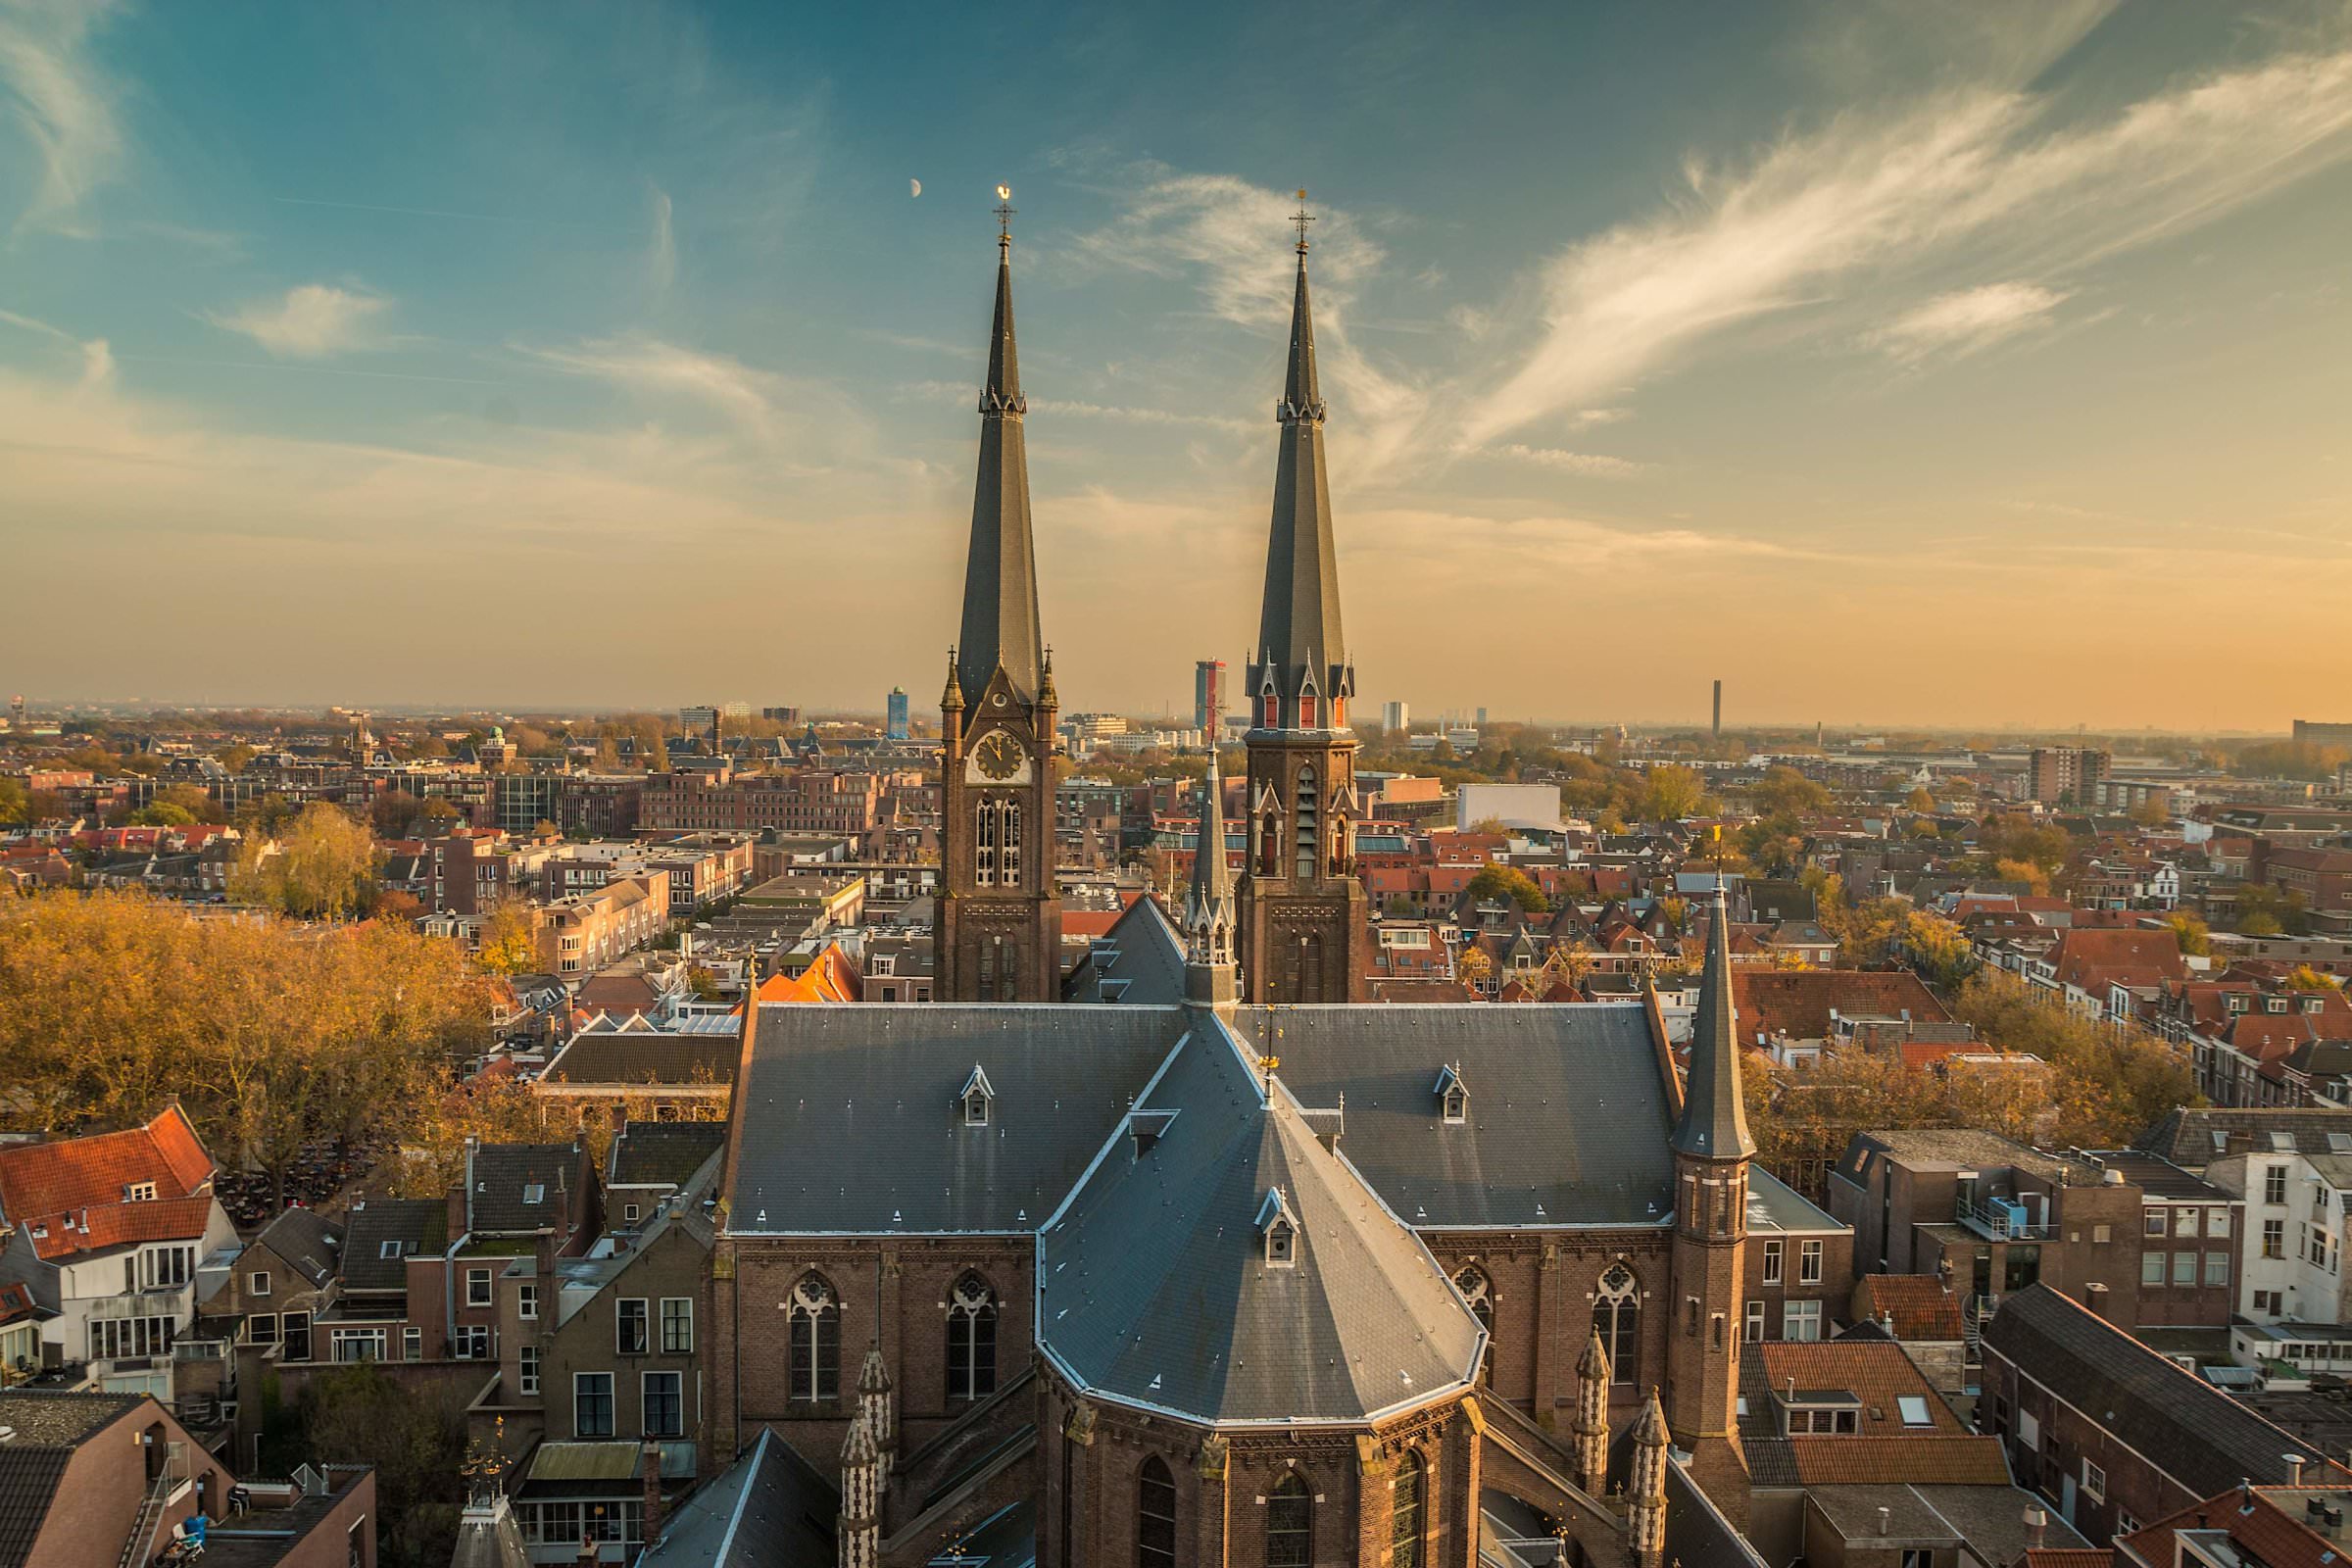 Incredible 7 night 8 day itinerary to Amsterdam and Delft